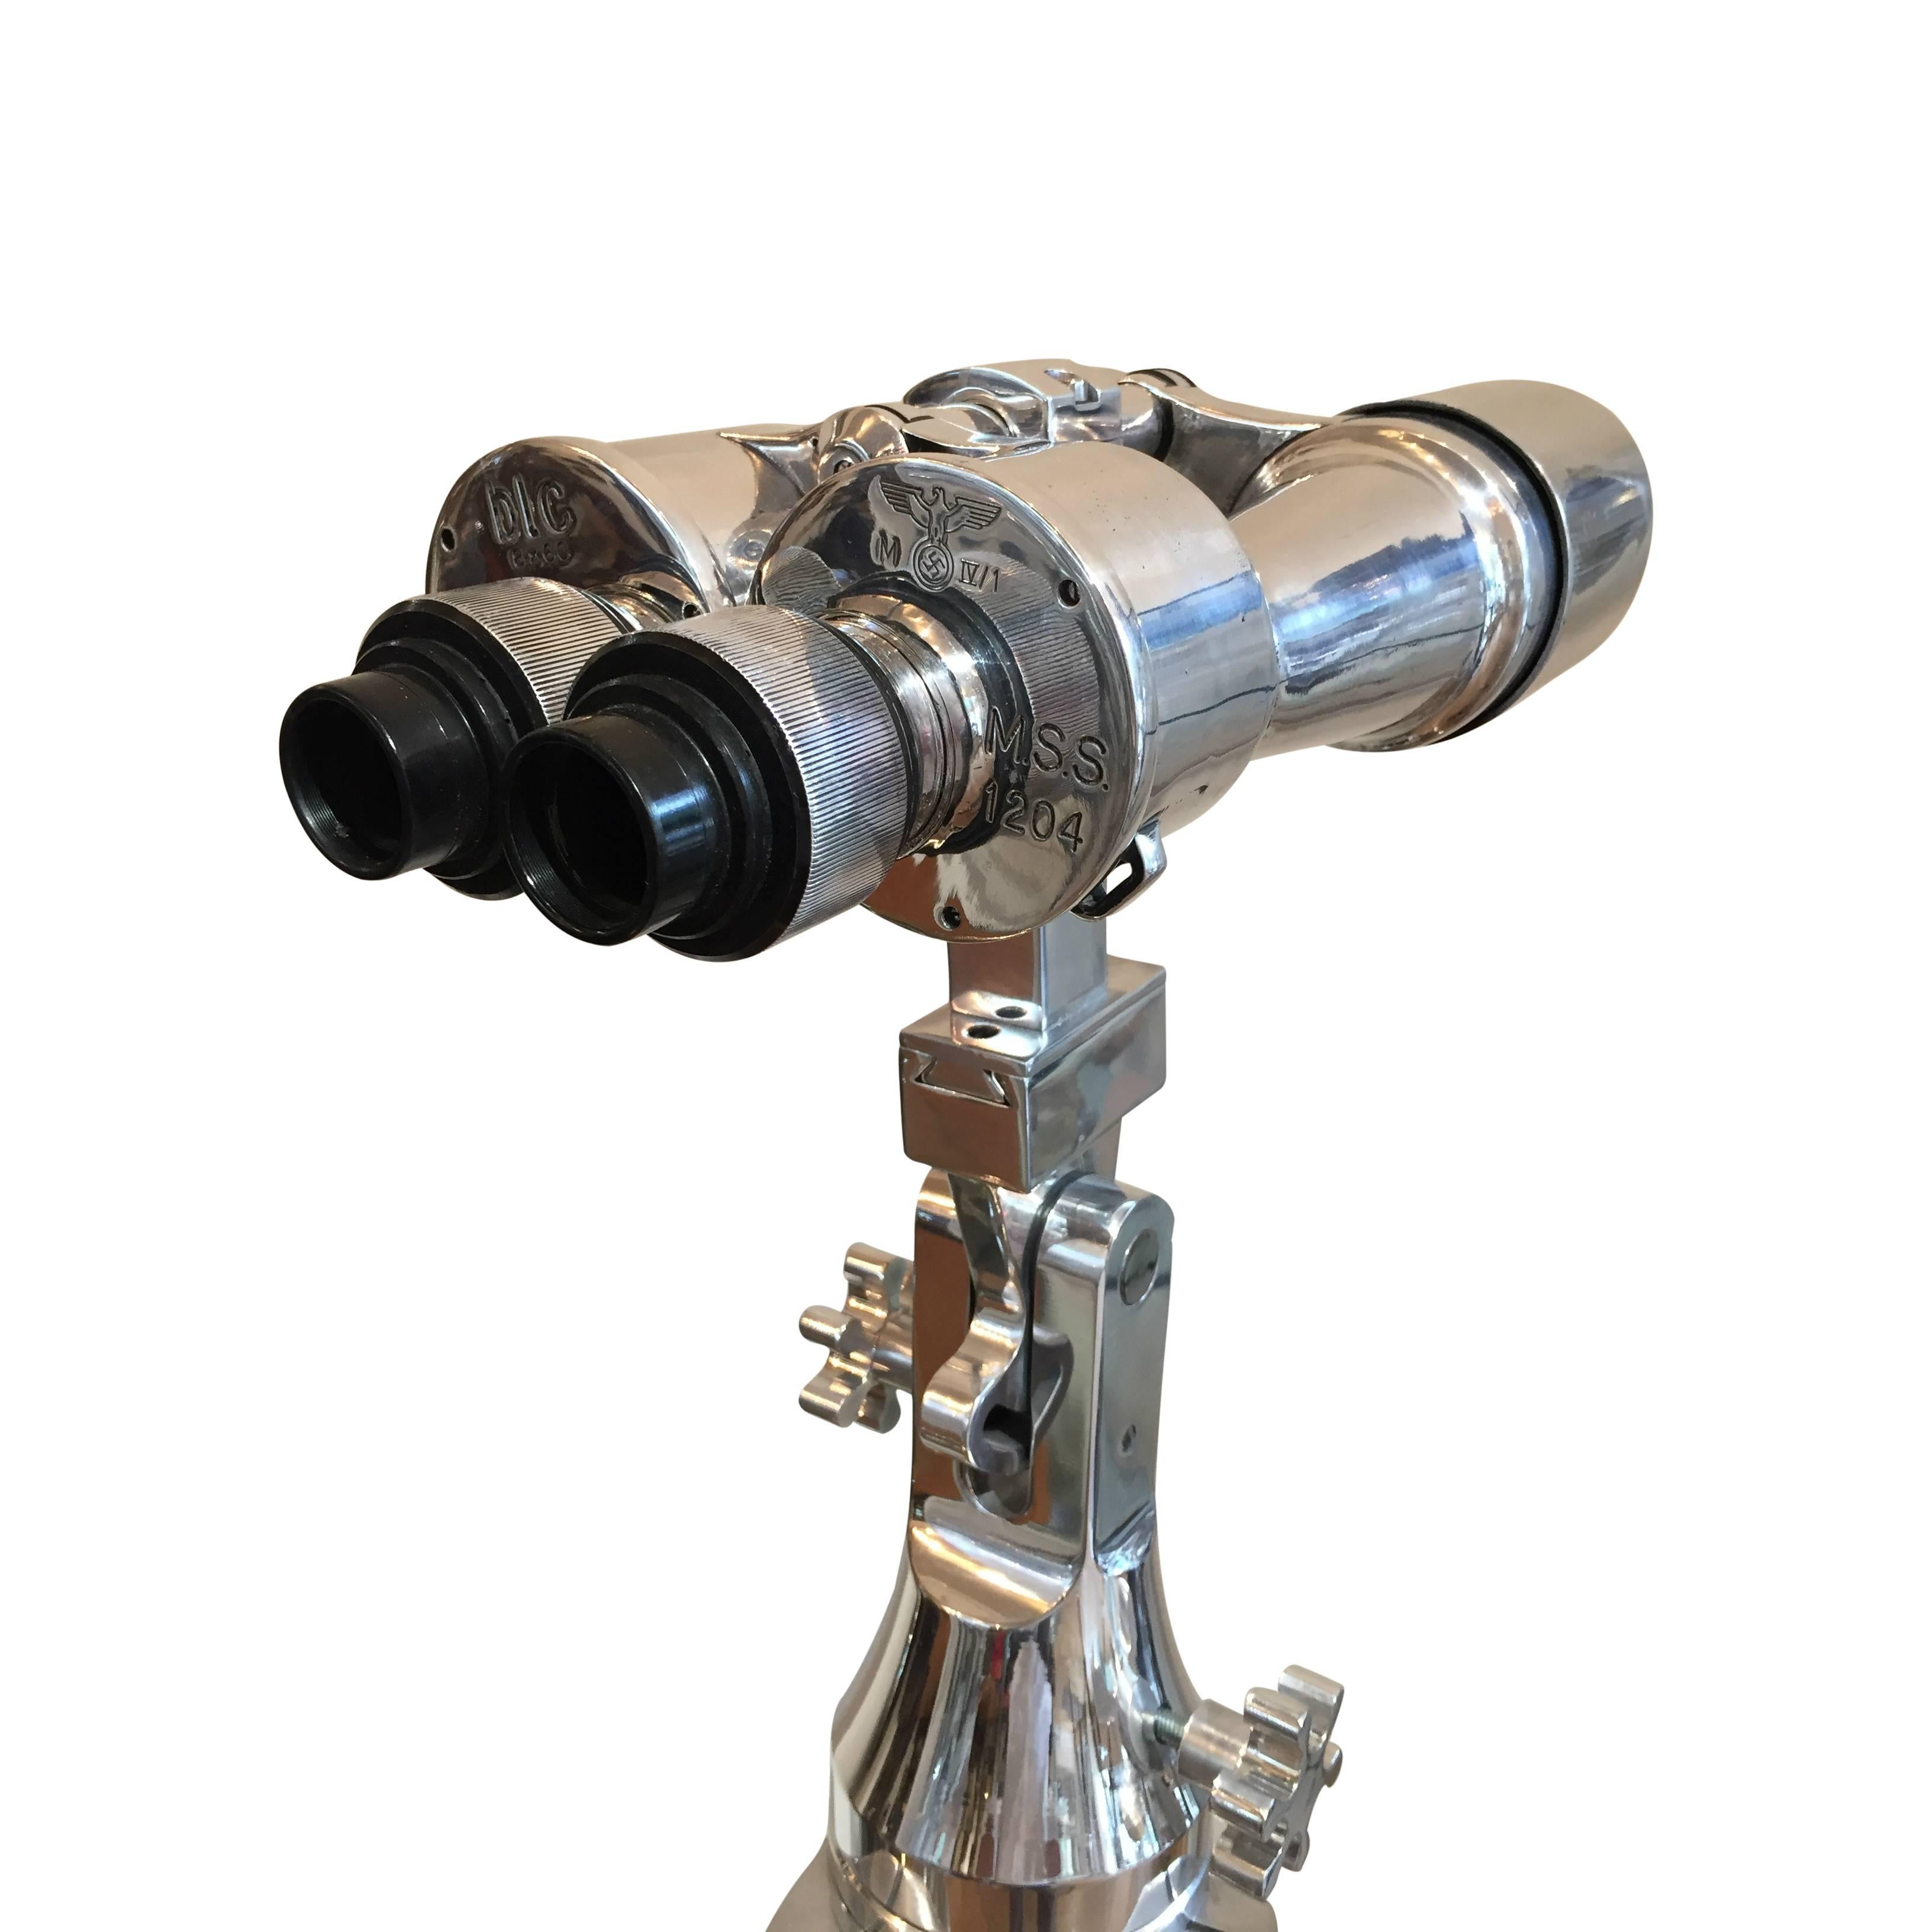 This is an excellent example of a rare WWII Carl Zeiss 8 x 60 binocular. This binocular is marked, 